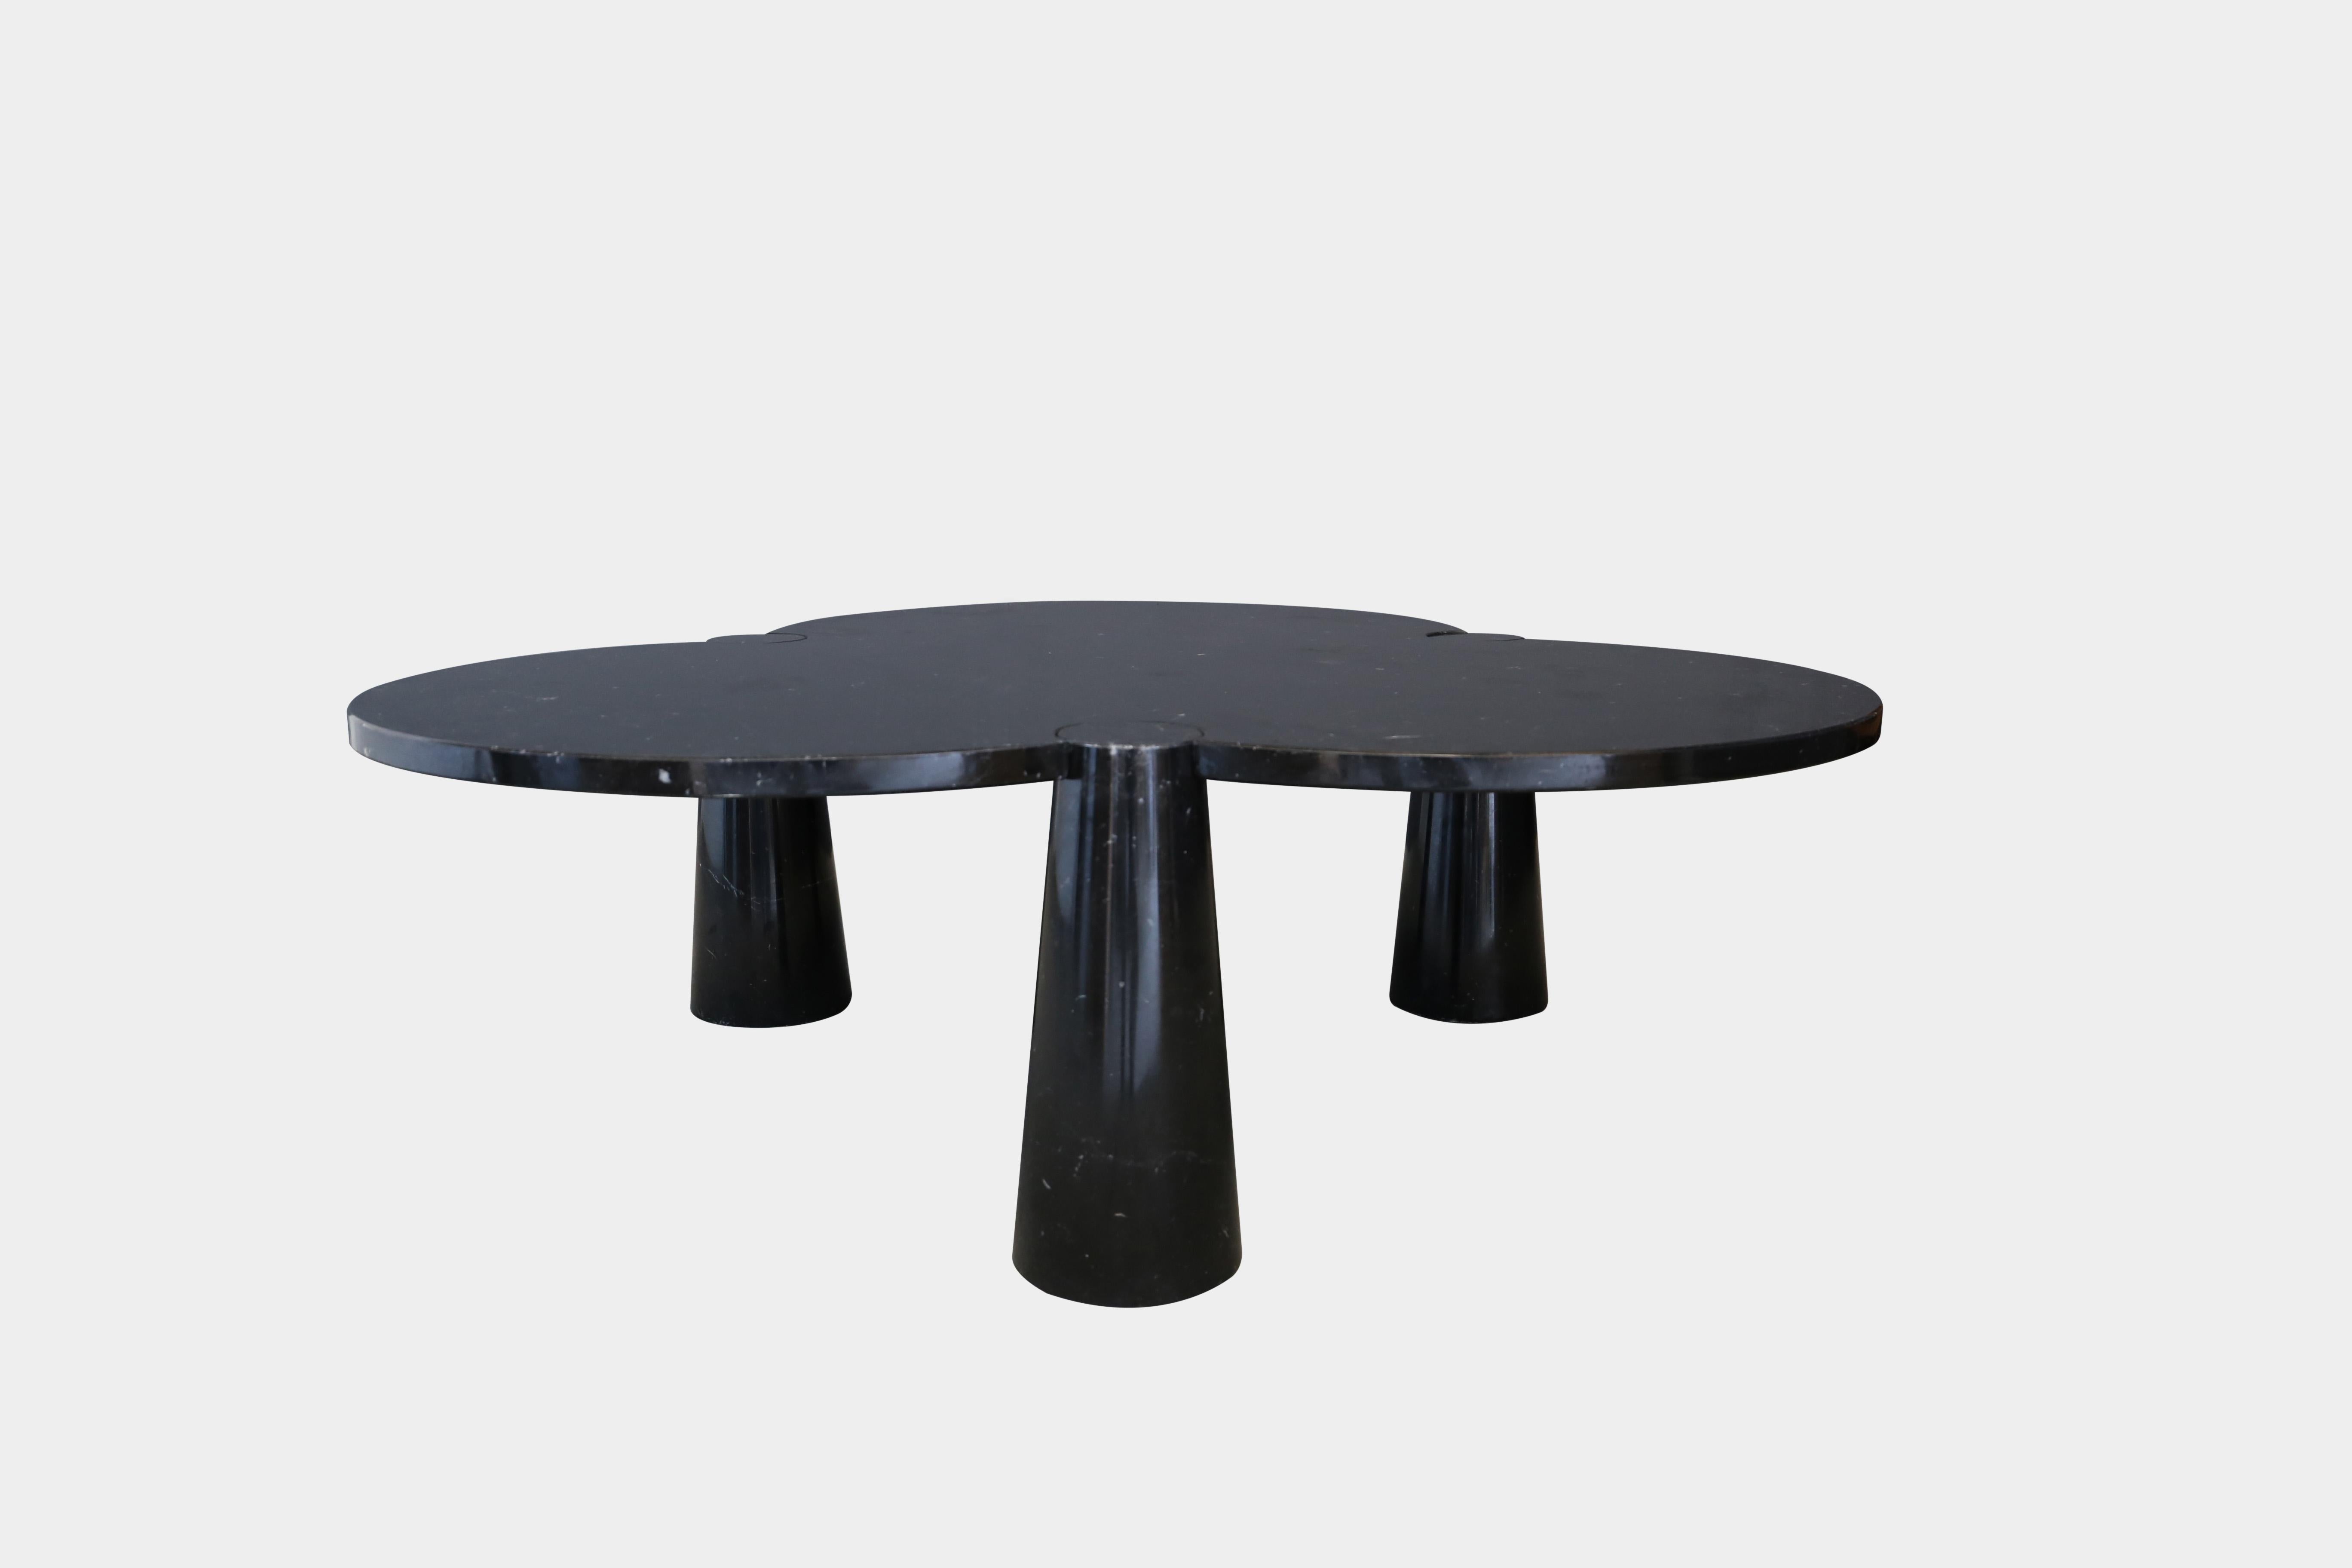 Angelo Mangiarotti for Skipper from the Eros series very rare (no longer in production in current series) and large Triforglio coffee table in black Marquina marble with an elegant shamrock-shape designed tabletop interlocked with tops of three